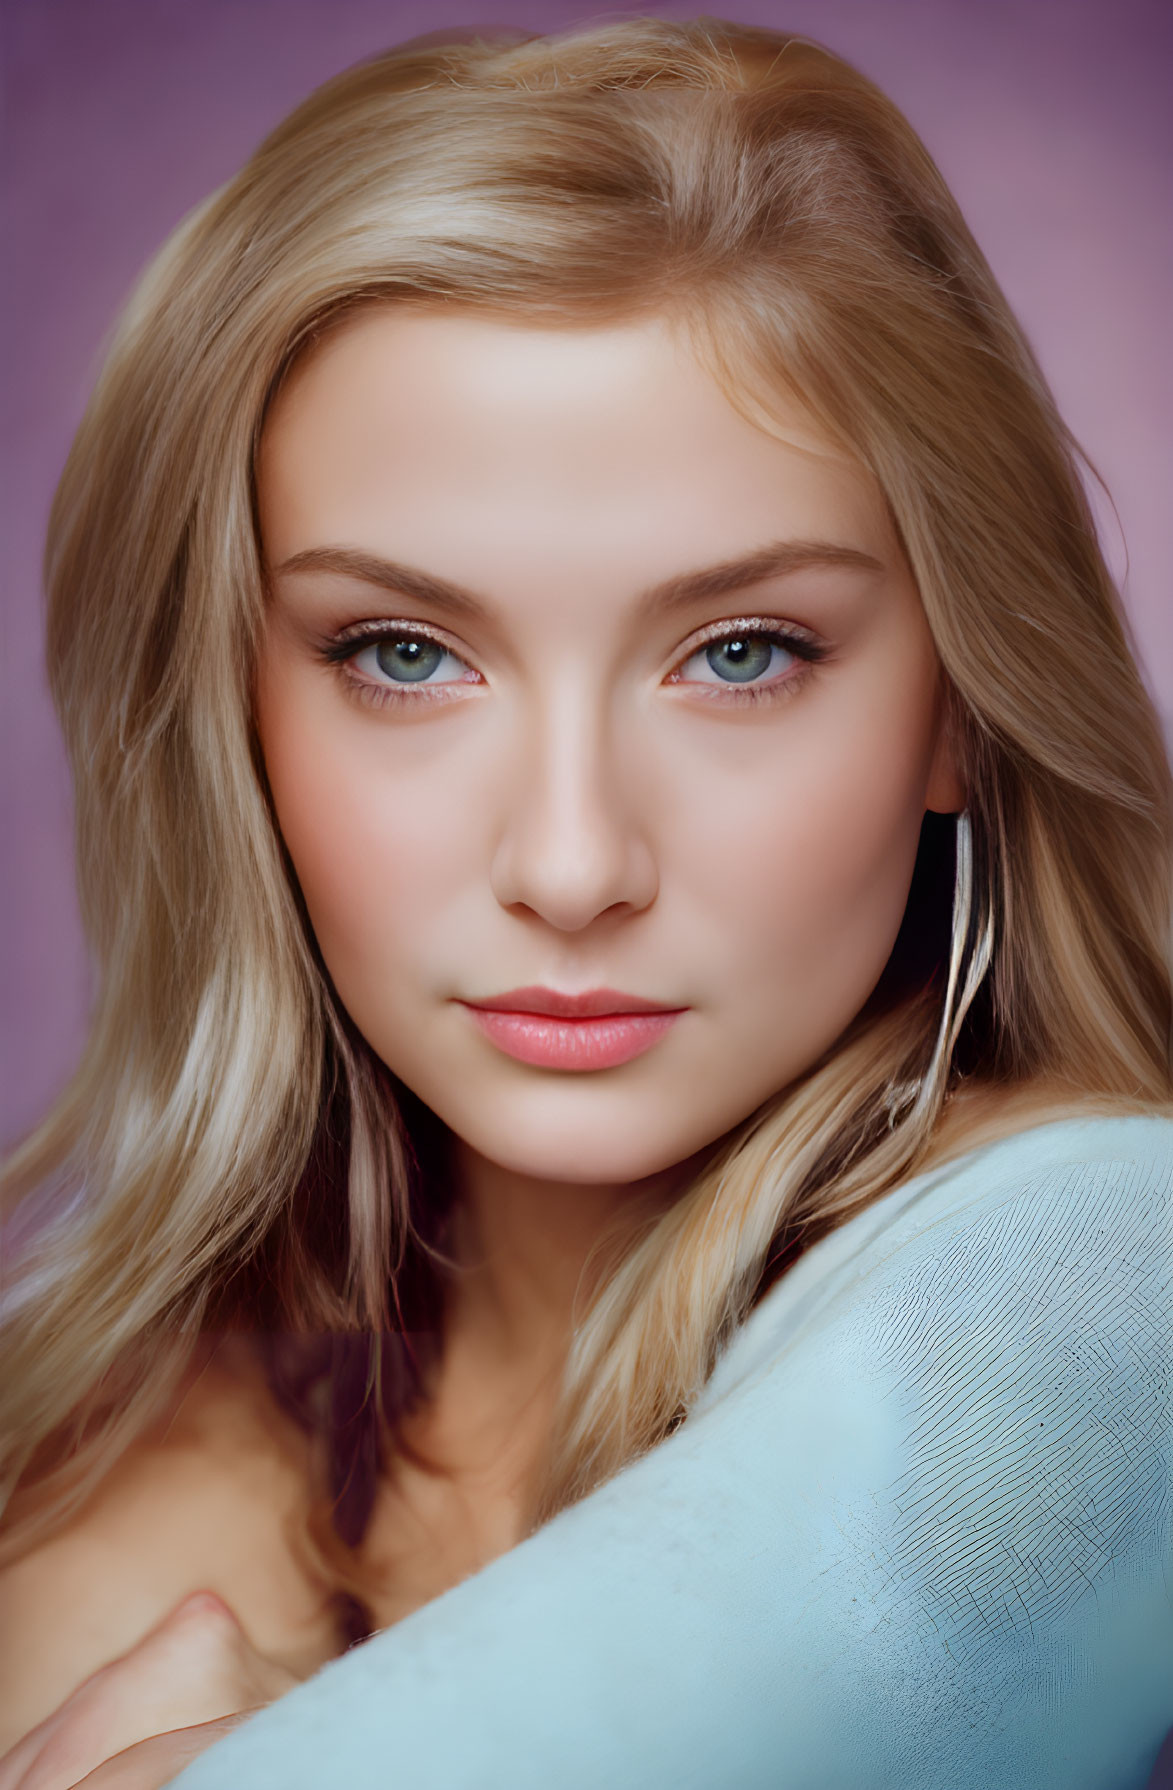 Blonde Woman Portrait with Blue Eyes on Purple Background